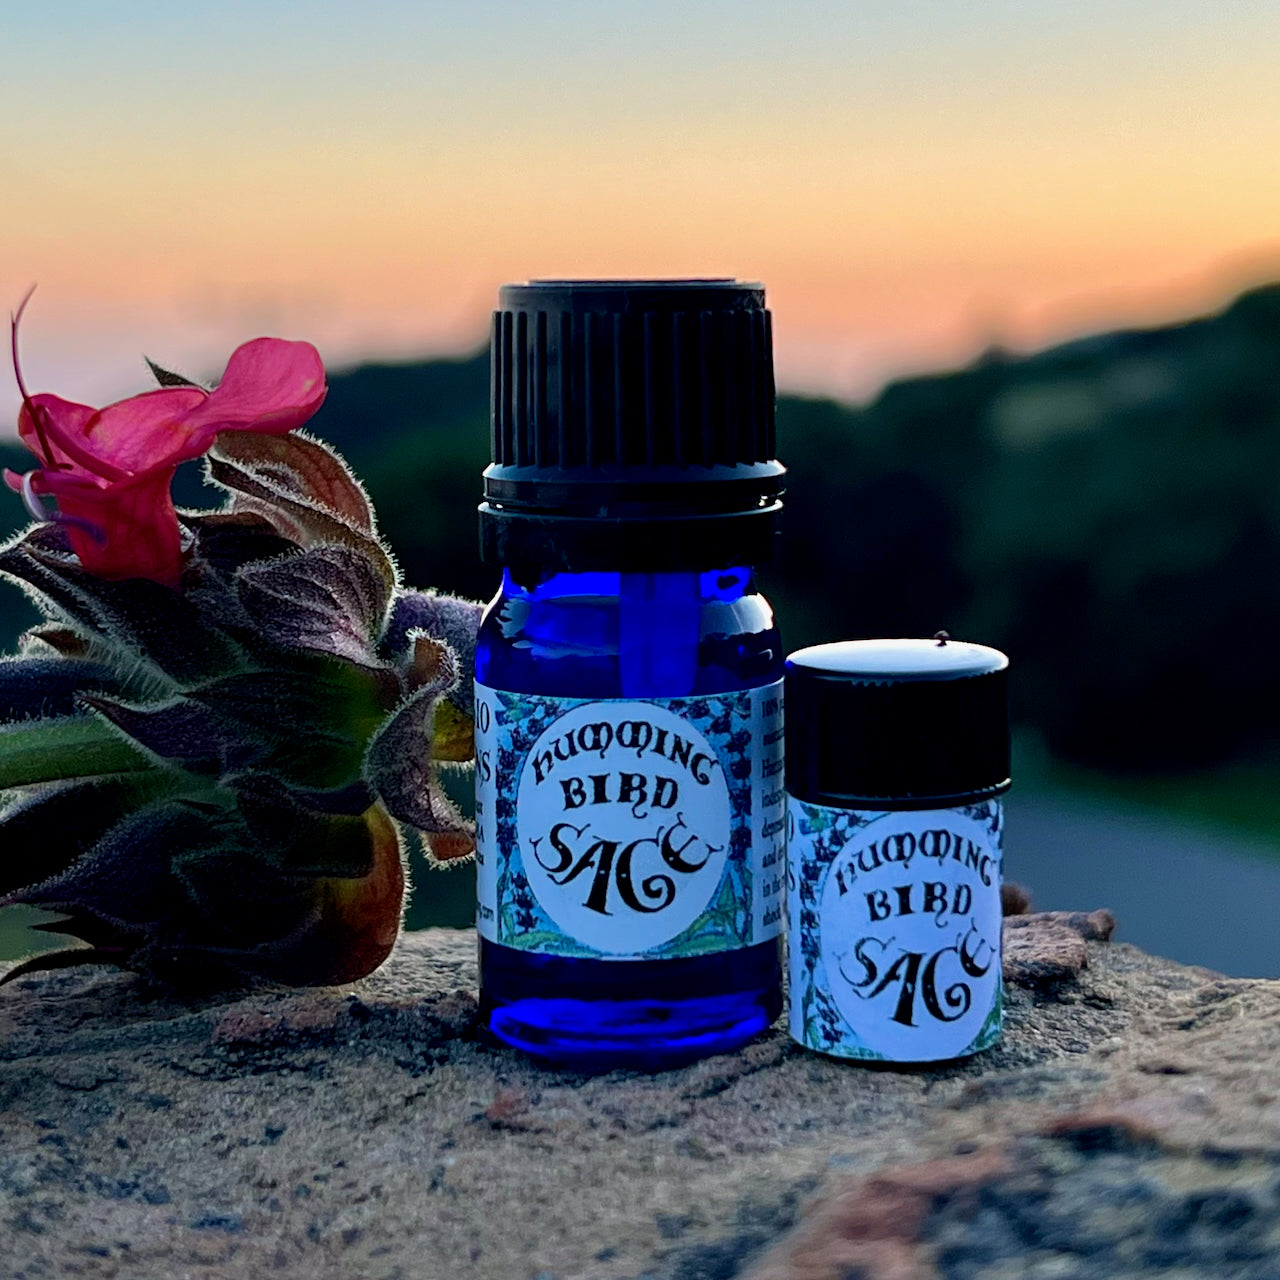 Photograph of Hummingbird Sage Essential oil in 5 ml and 2.3 ml size cobalt blue glass bottles on a rock with Hummingbird Sage flower